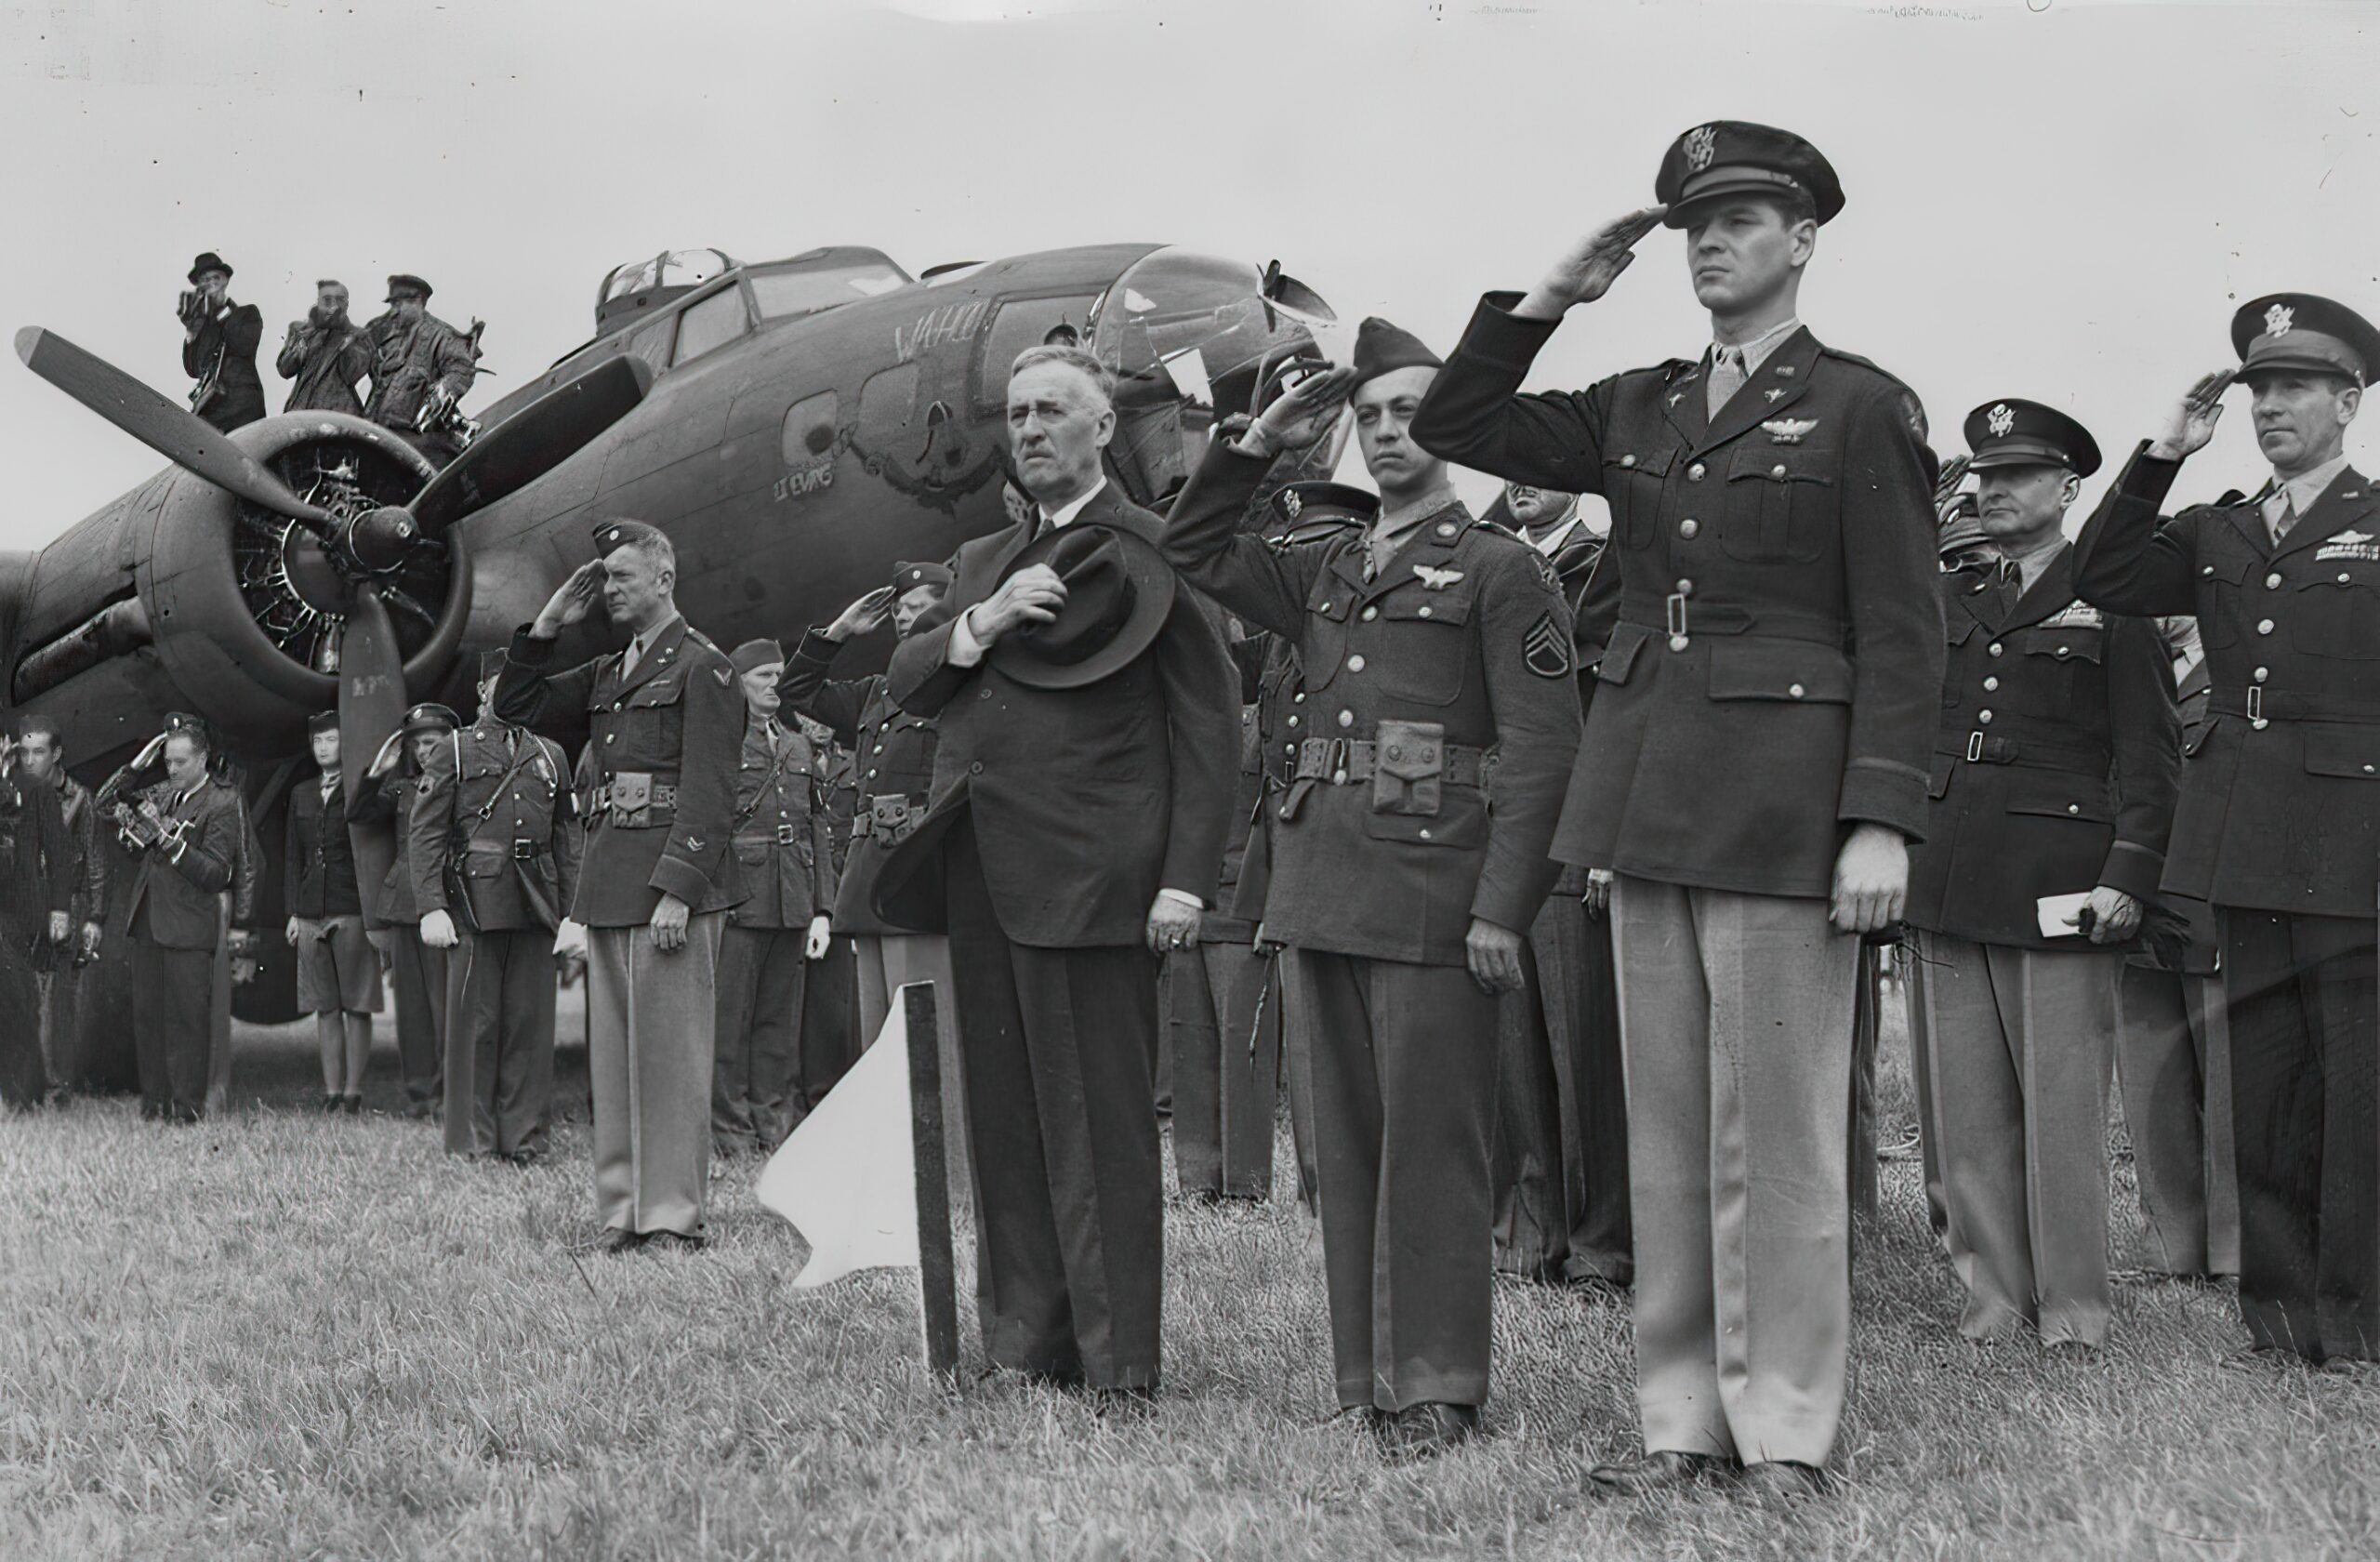 Staff Sergeant Maynard Smith, Secretary of War Henry L Stimson and personnel of the 306th Bomb Group salute in front of a B-17 Flying Fortress, during a medal ceremony at Thurleigh. Passed for publication 16 Jul 1943